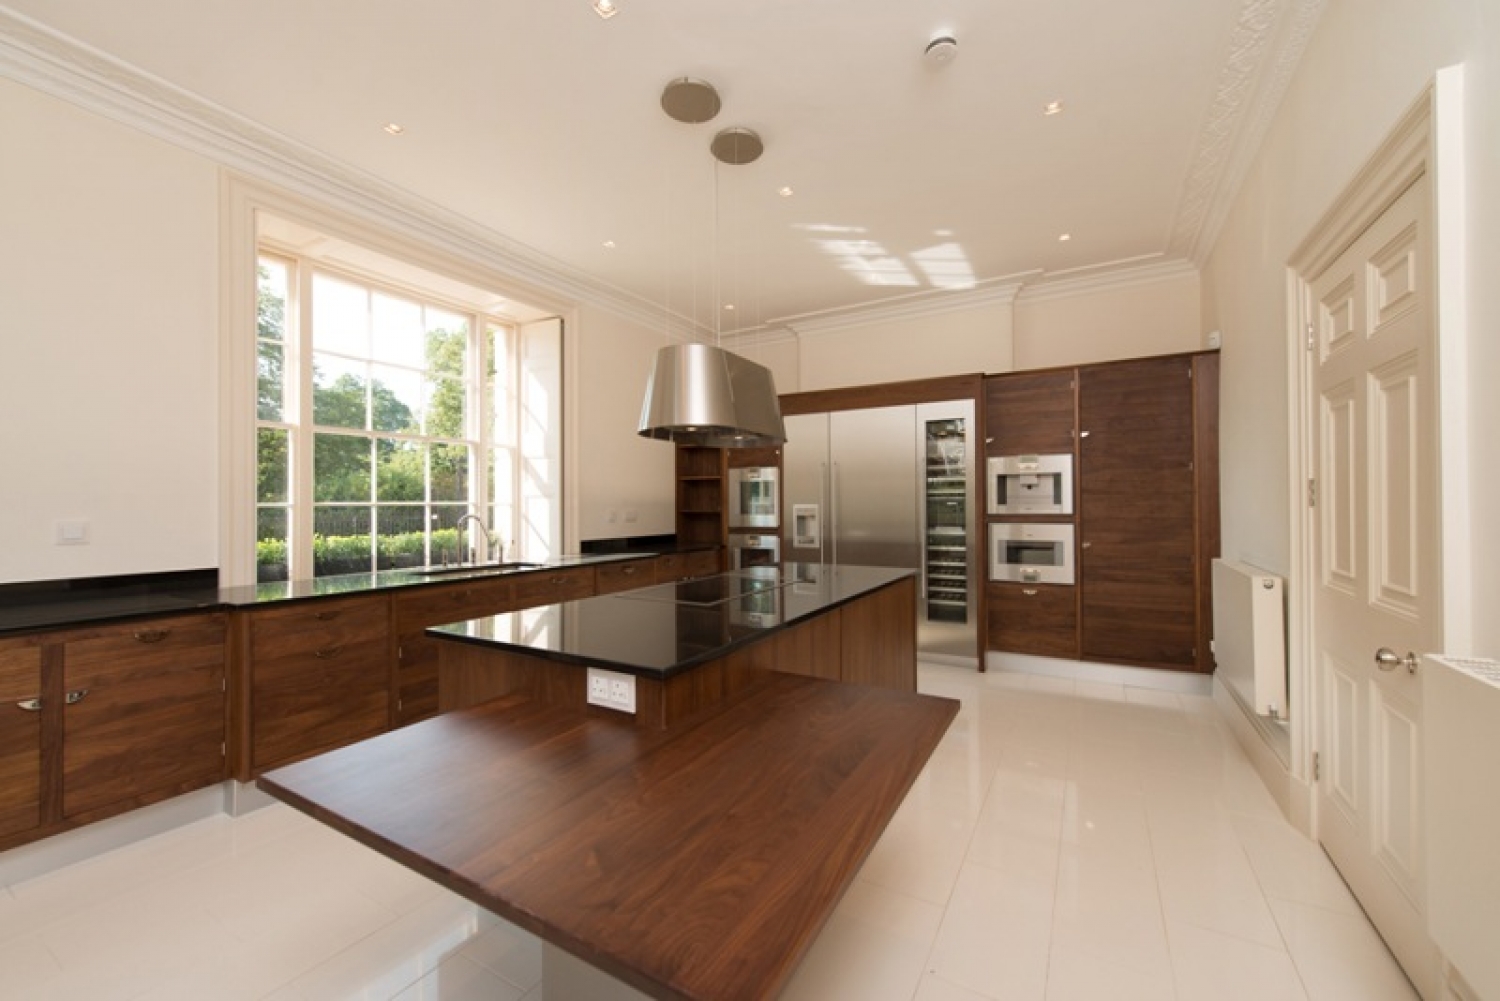 Renovation of 3 Houses, 13 Bathrooms and 3 kitchens with an array of Marble’s and Granite worktops. 